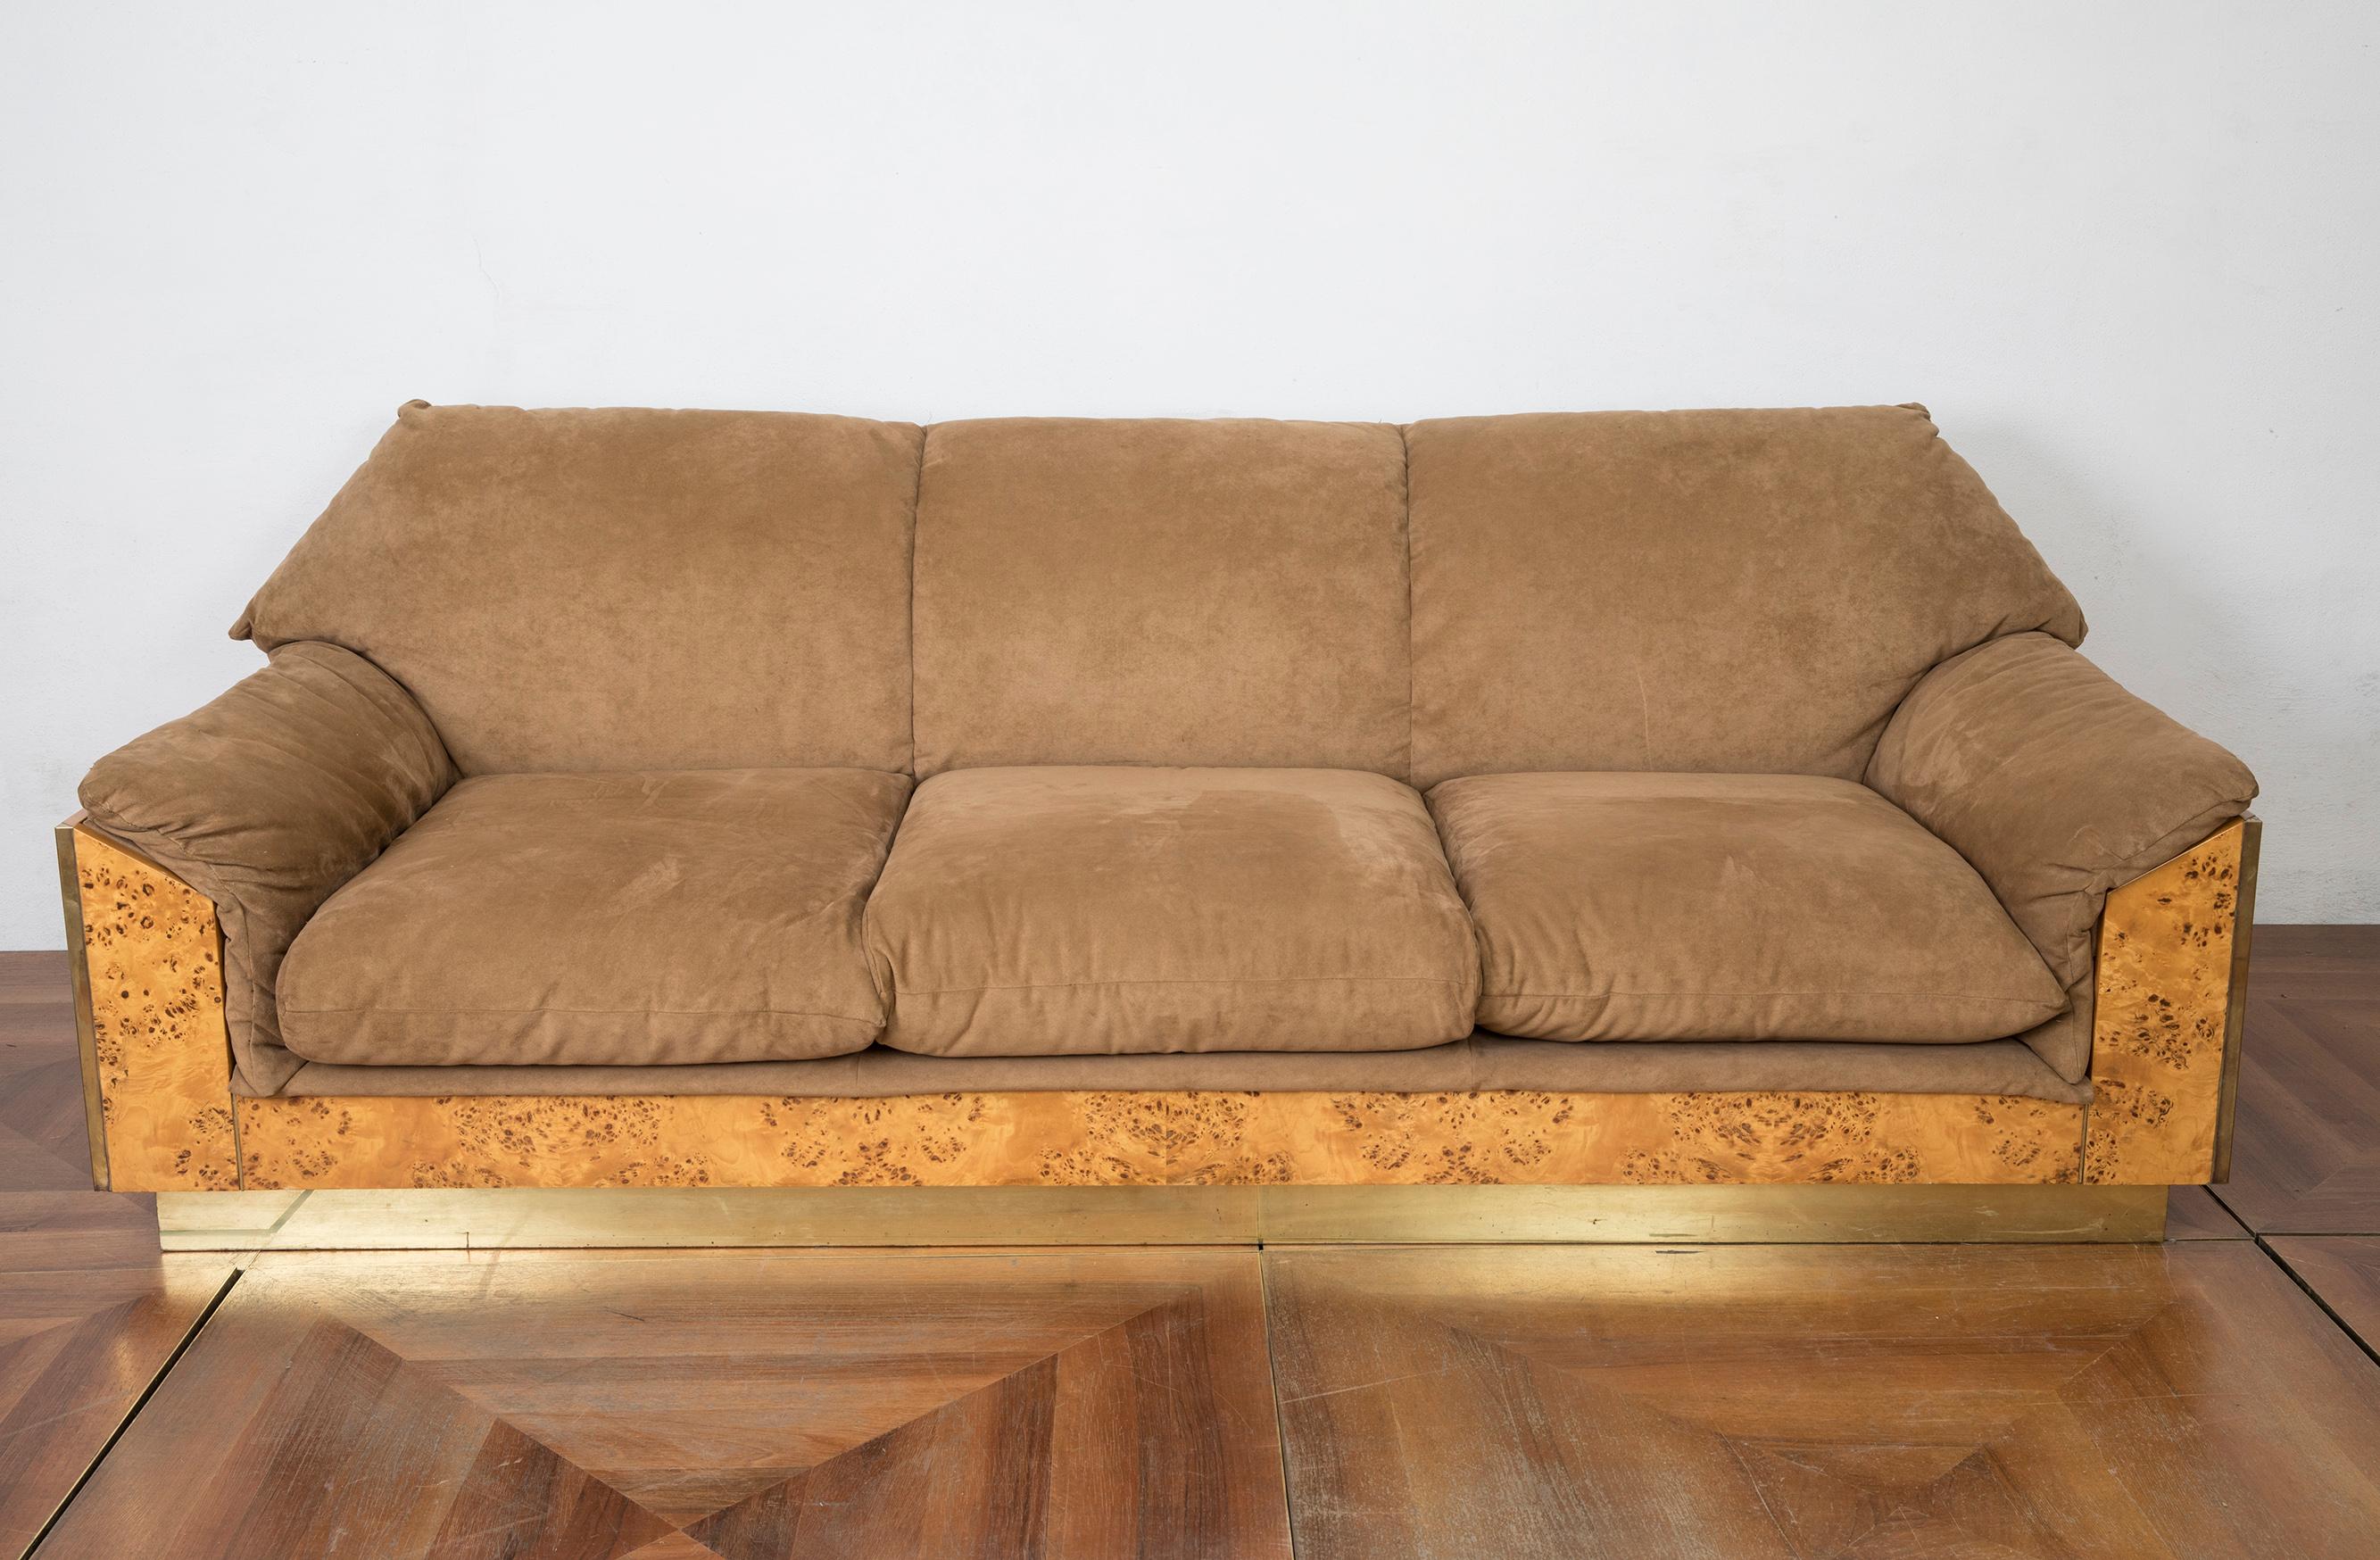 Extremely rare thuja burl and suede set of two lounge chairs and a sofa designed by Willy Rizzo in the early 1970s for Mario Sabot.
Lounge Chairs size:
90cm (Depth) 95cm (Width) 64cm (Height)
Sofa size:
90cm (Depth) 208cm (Width) 64cm